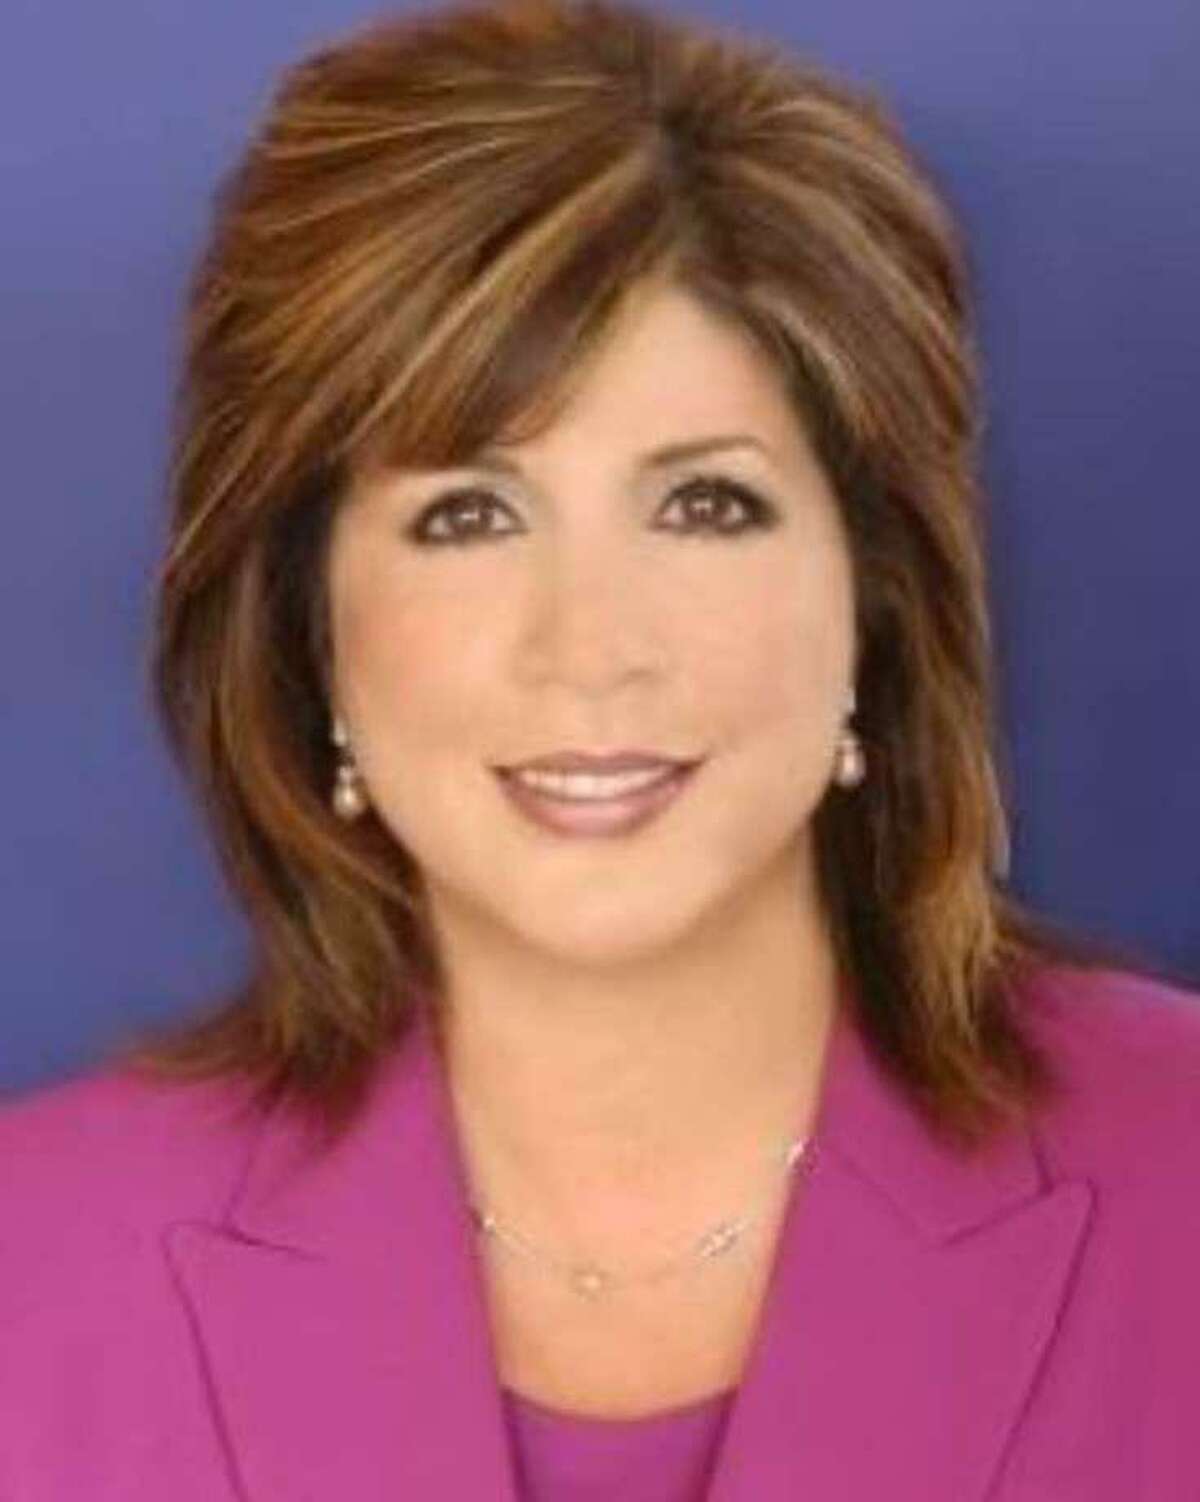 Rosenda Rios was KSAT anchor from 2001 to 2010. She died of cancer on July 16, 2020, in Houston. She was 62.